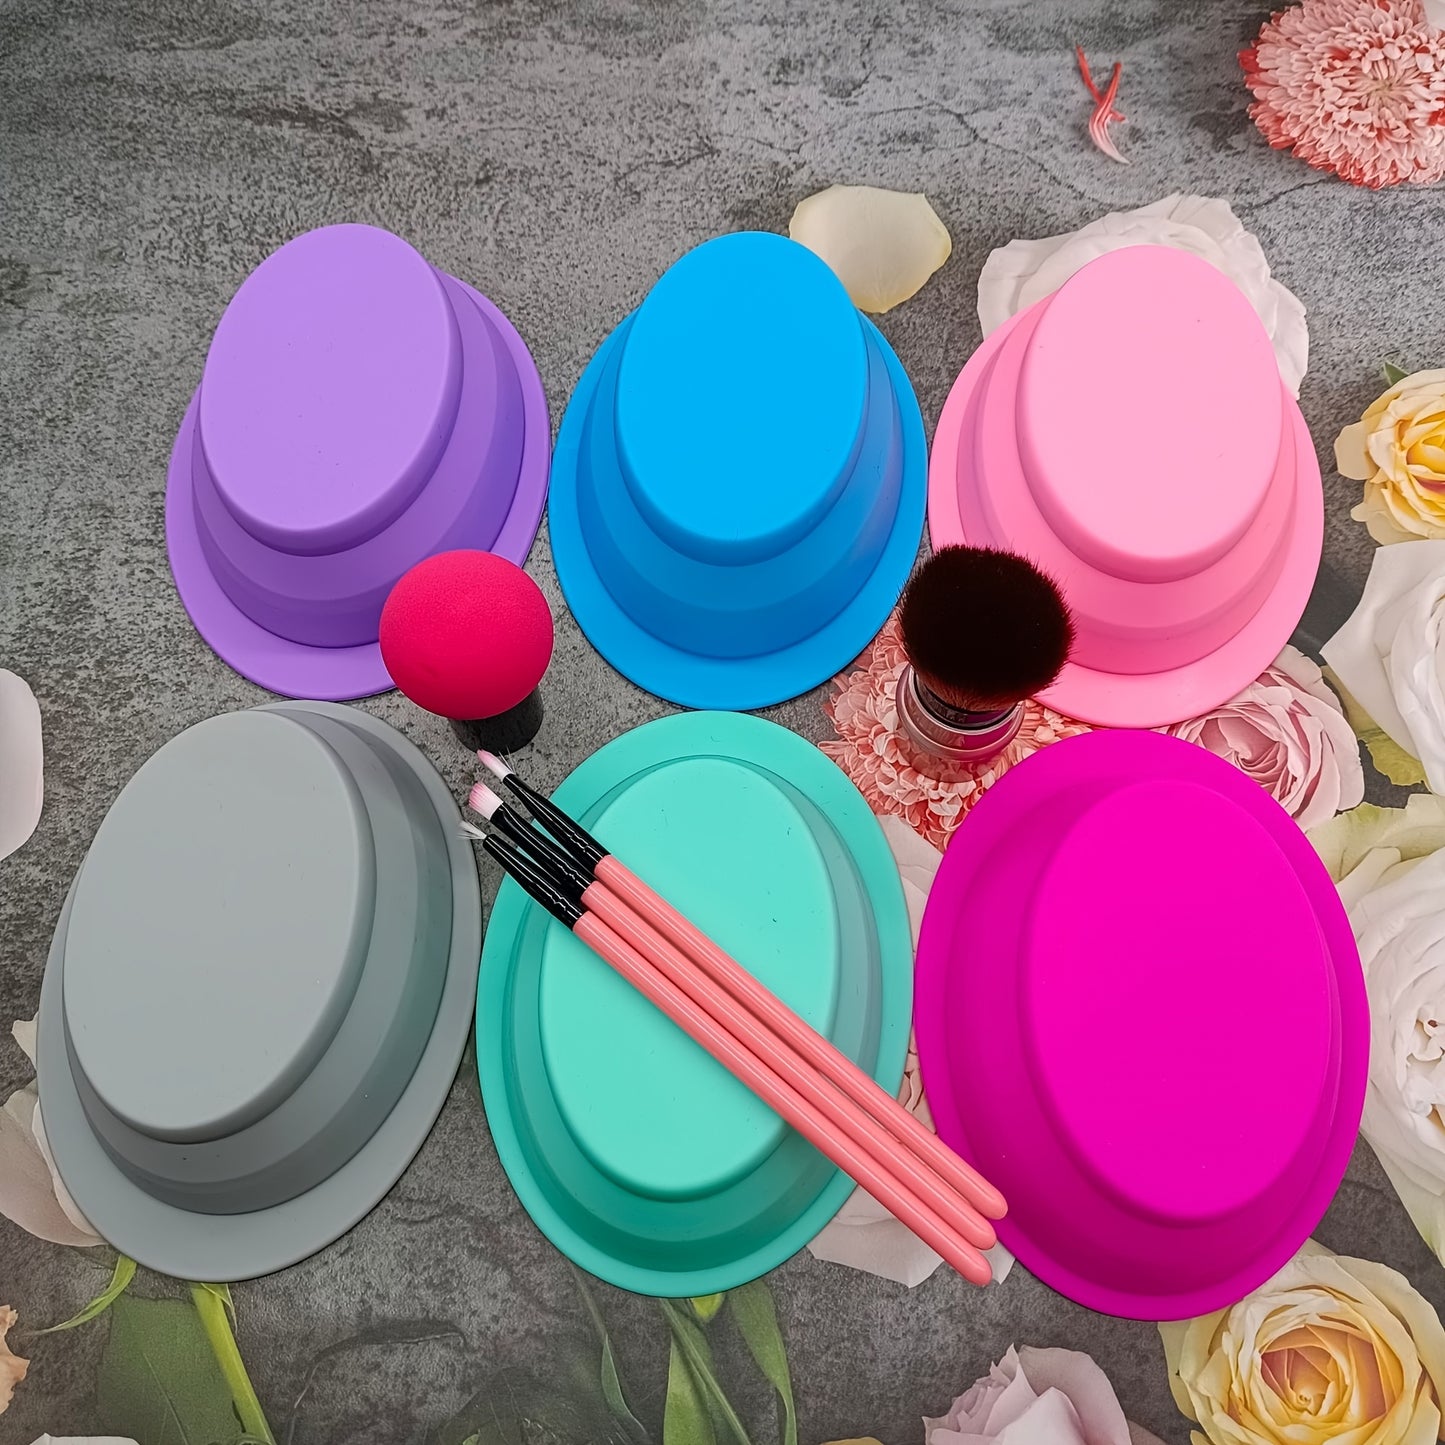 Foldable Silicone Washing Brush & Beauty Egg Bowl Makeup Brush Cleaning Pad - A Gift for Friends and Family, Perfect for Travel and Business Trips